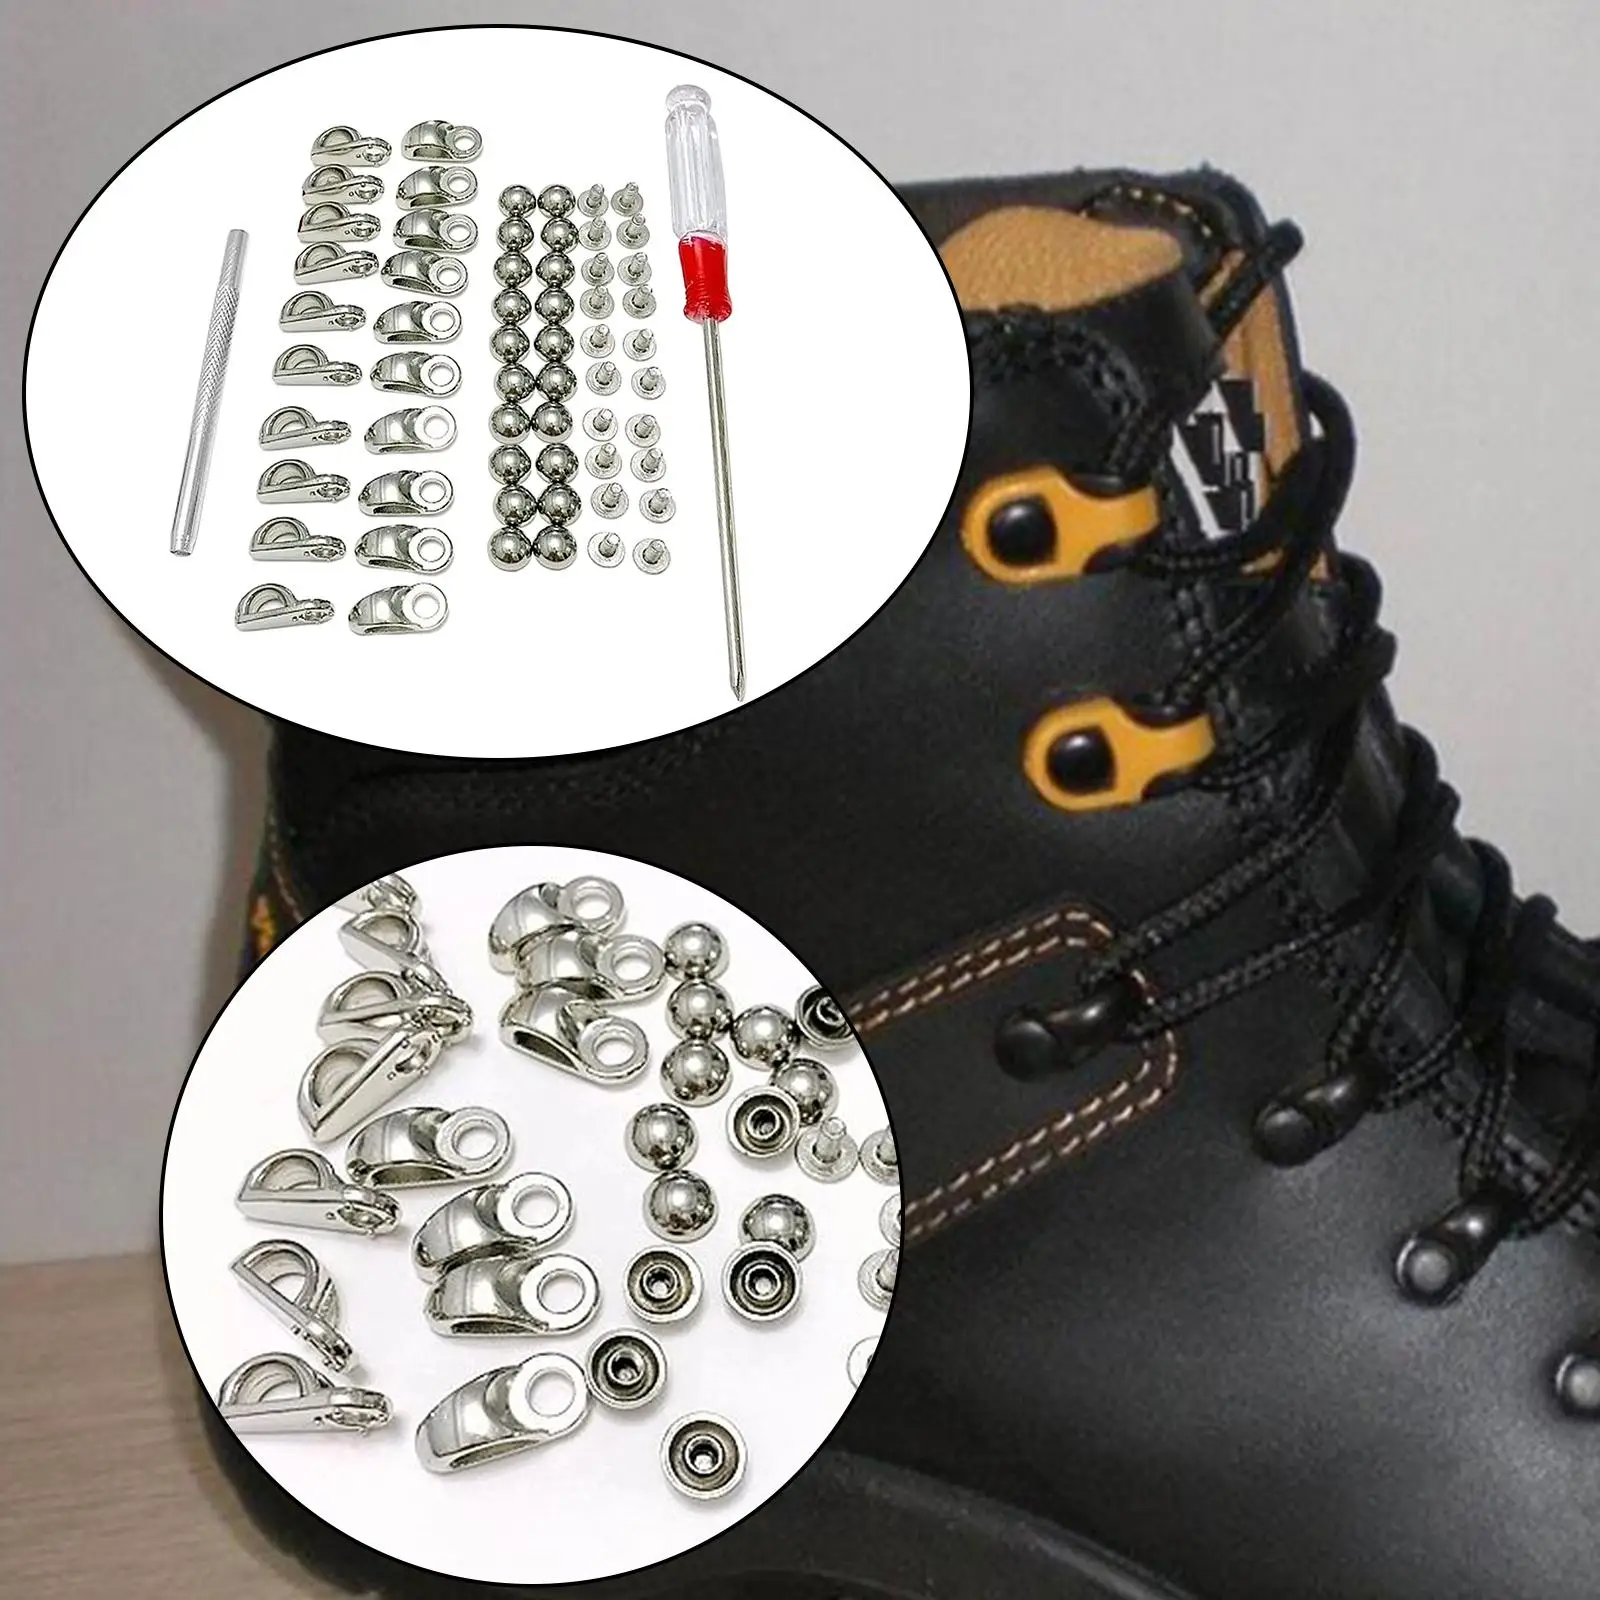 20 Sets Shoe Lace Hooks Lace Fittings with Rivets, Alloy Boot Lace Safety  Shoelace Buckles for Climb Hiking Shoes Work Outdoor Mountaineering Boots